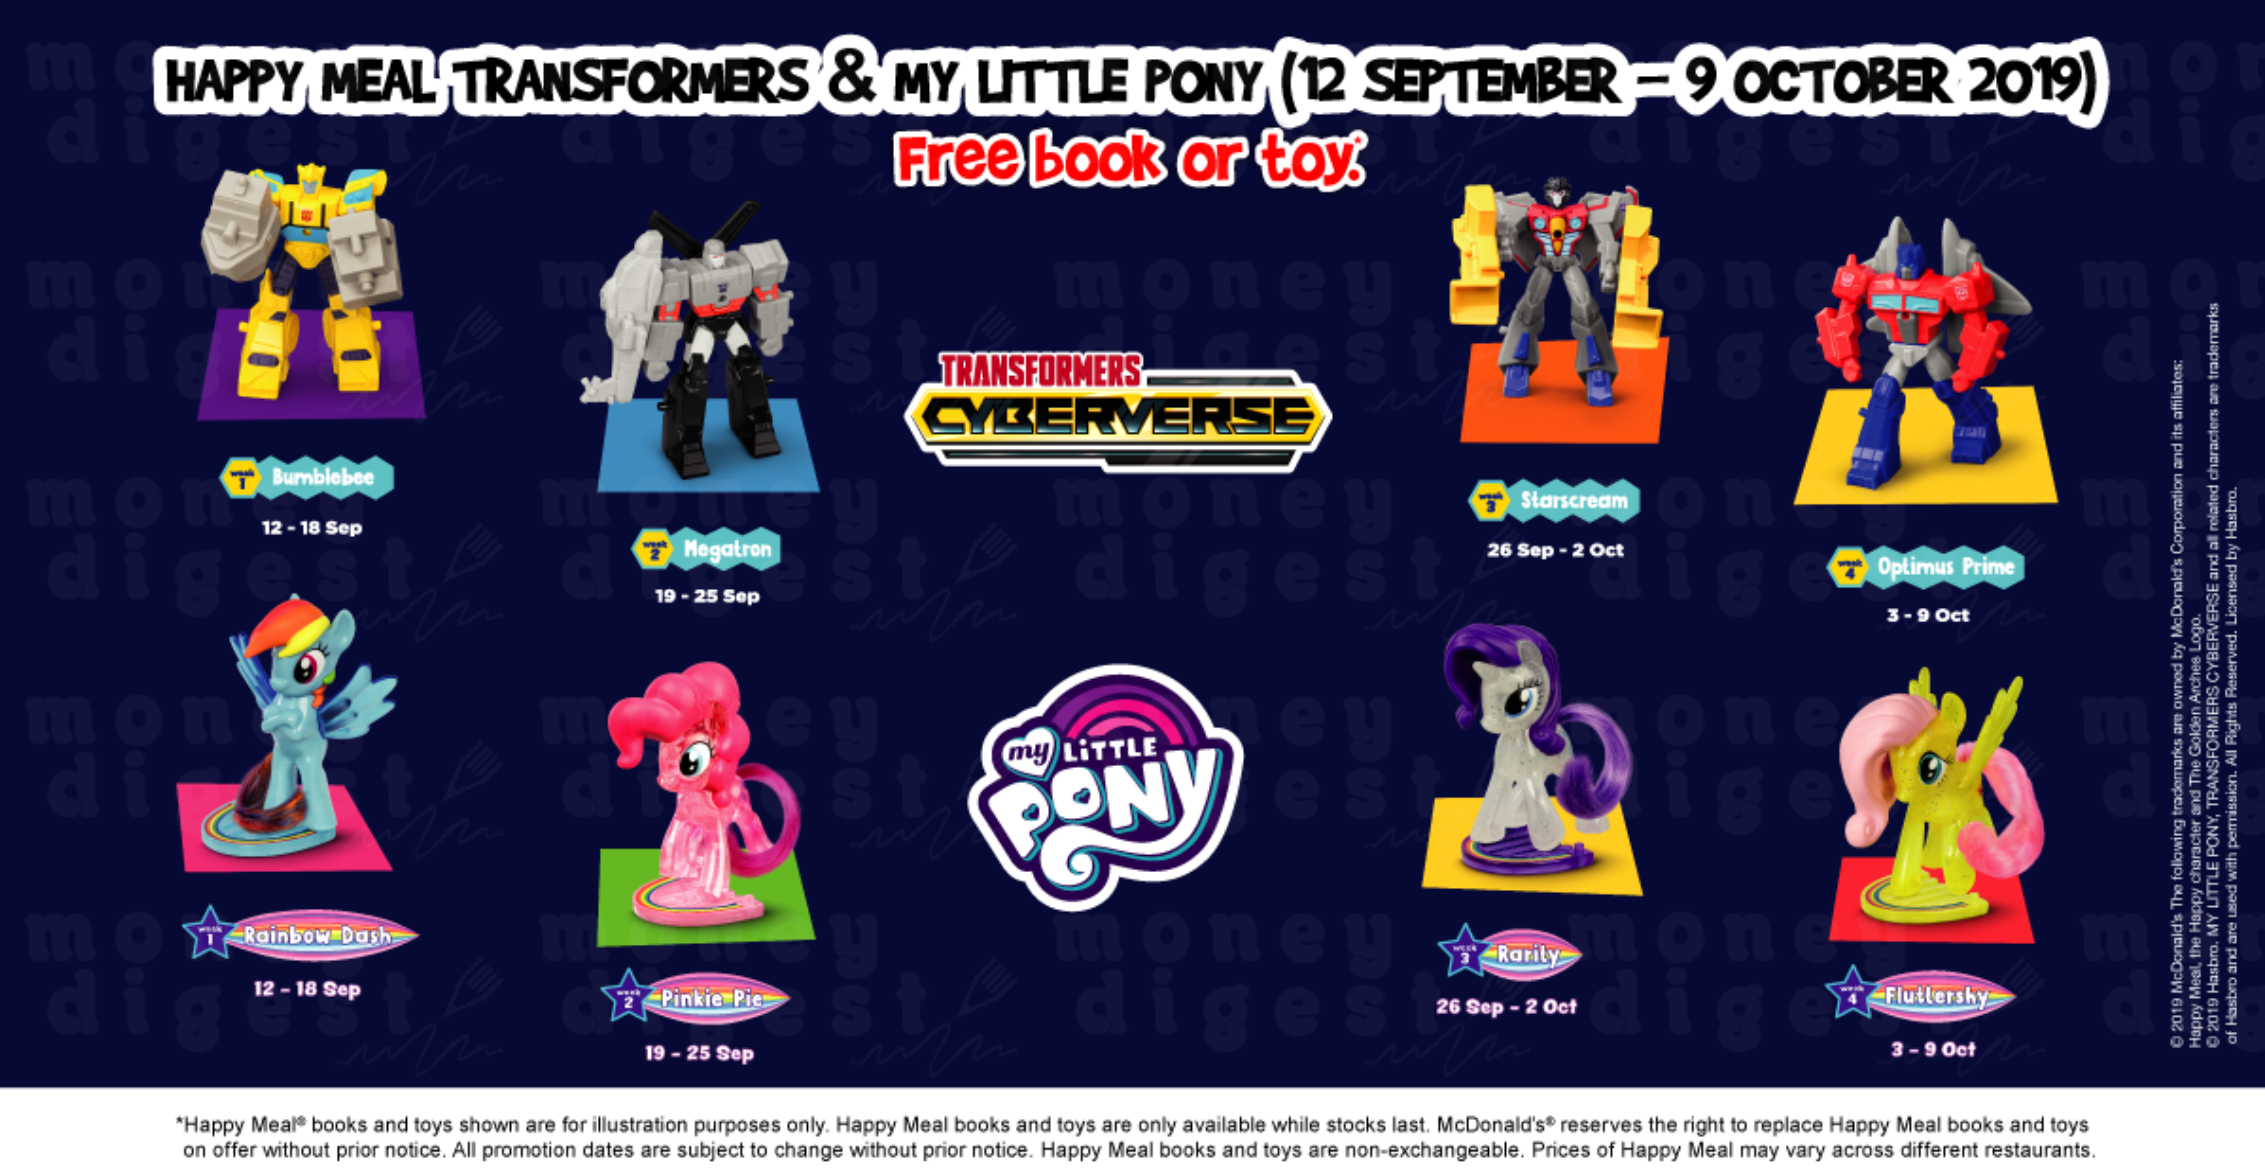 New McDonald’s Happy Meal Transformers and My Little Pony Toys to be launched from 12 Sep – 9 Oct 19 - 1